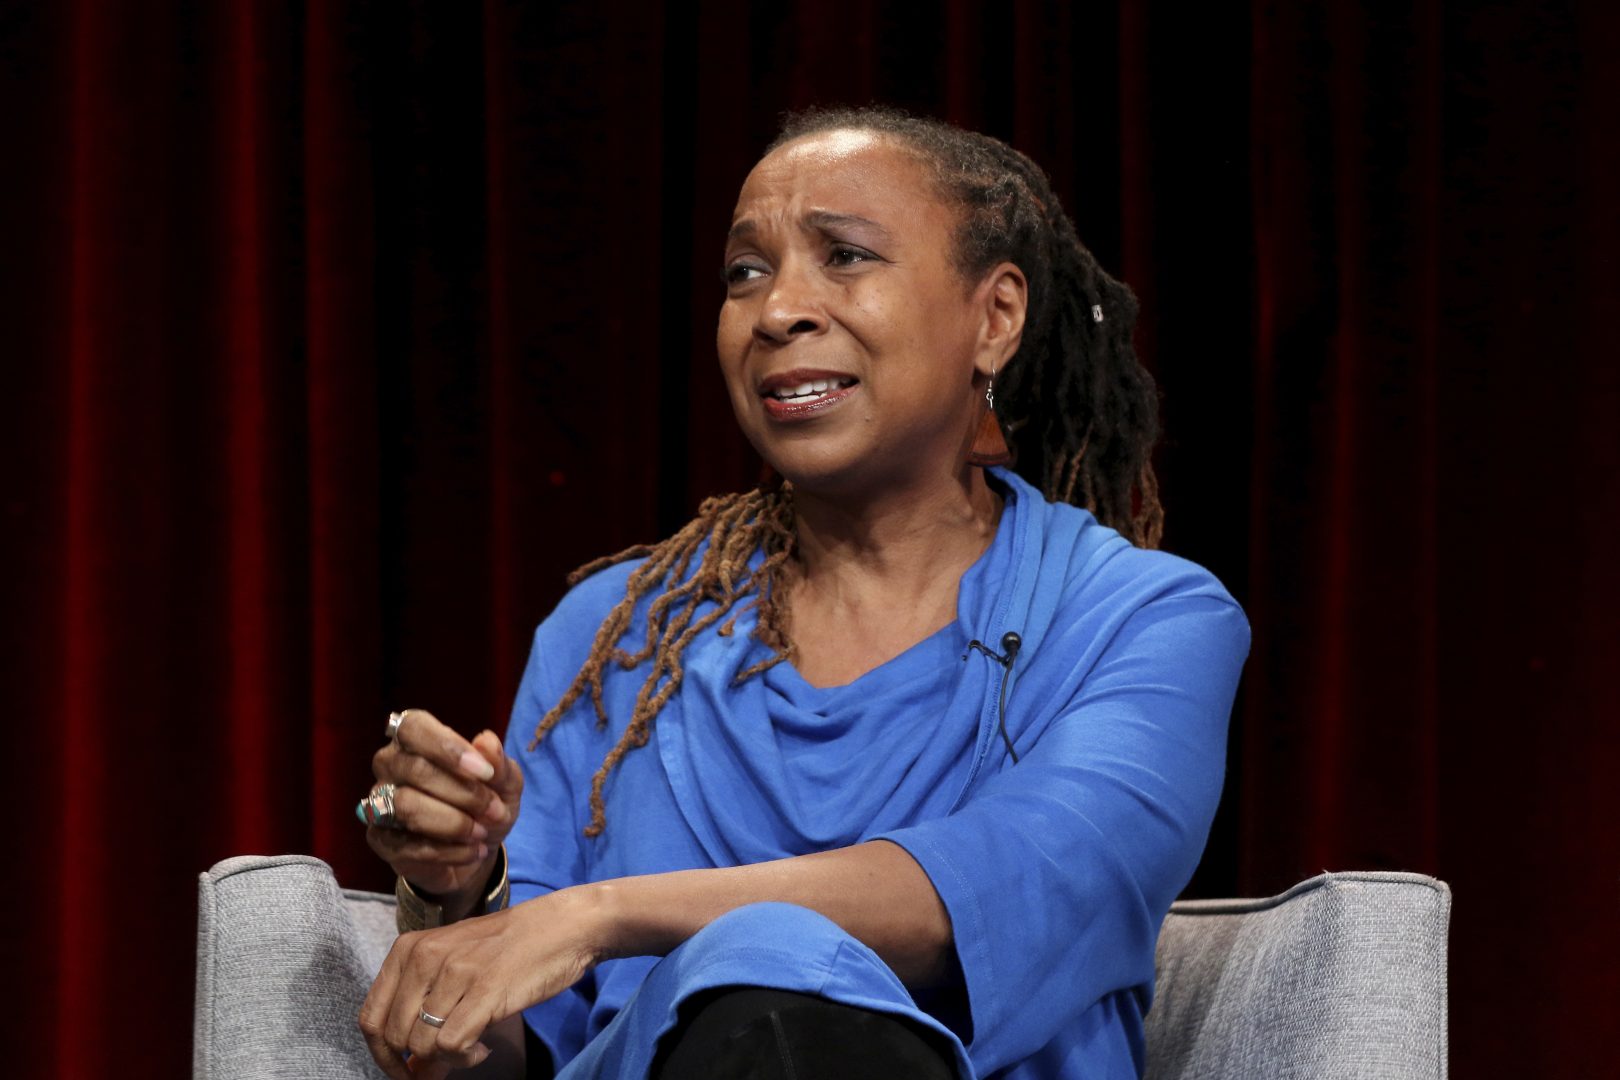 FILE - In this Feb. 2, 2019, file photo, Kimberlé Crenshaw participates in the 'Reconstruction: America After Civil War' panel during the PBS presentation at the Television Critics Association Winter Press Tour at The Langham Huntington in Pasadena, Calif. Crenshaw, executive director of the African American Policy Forum, a social justice think tank based in New York City, was one of the early proponents of critical race theory. Initially, she says, it was “simply about telling a more complete story of who we are.” 